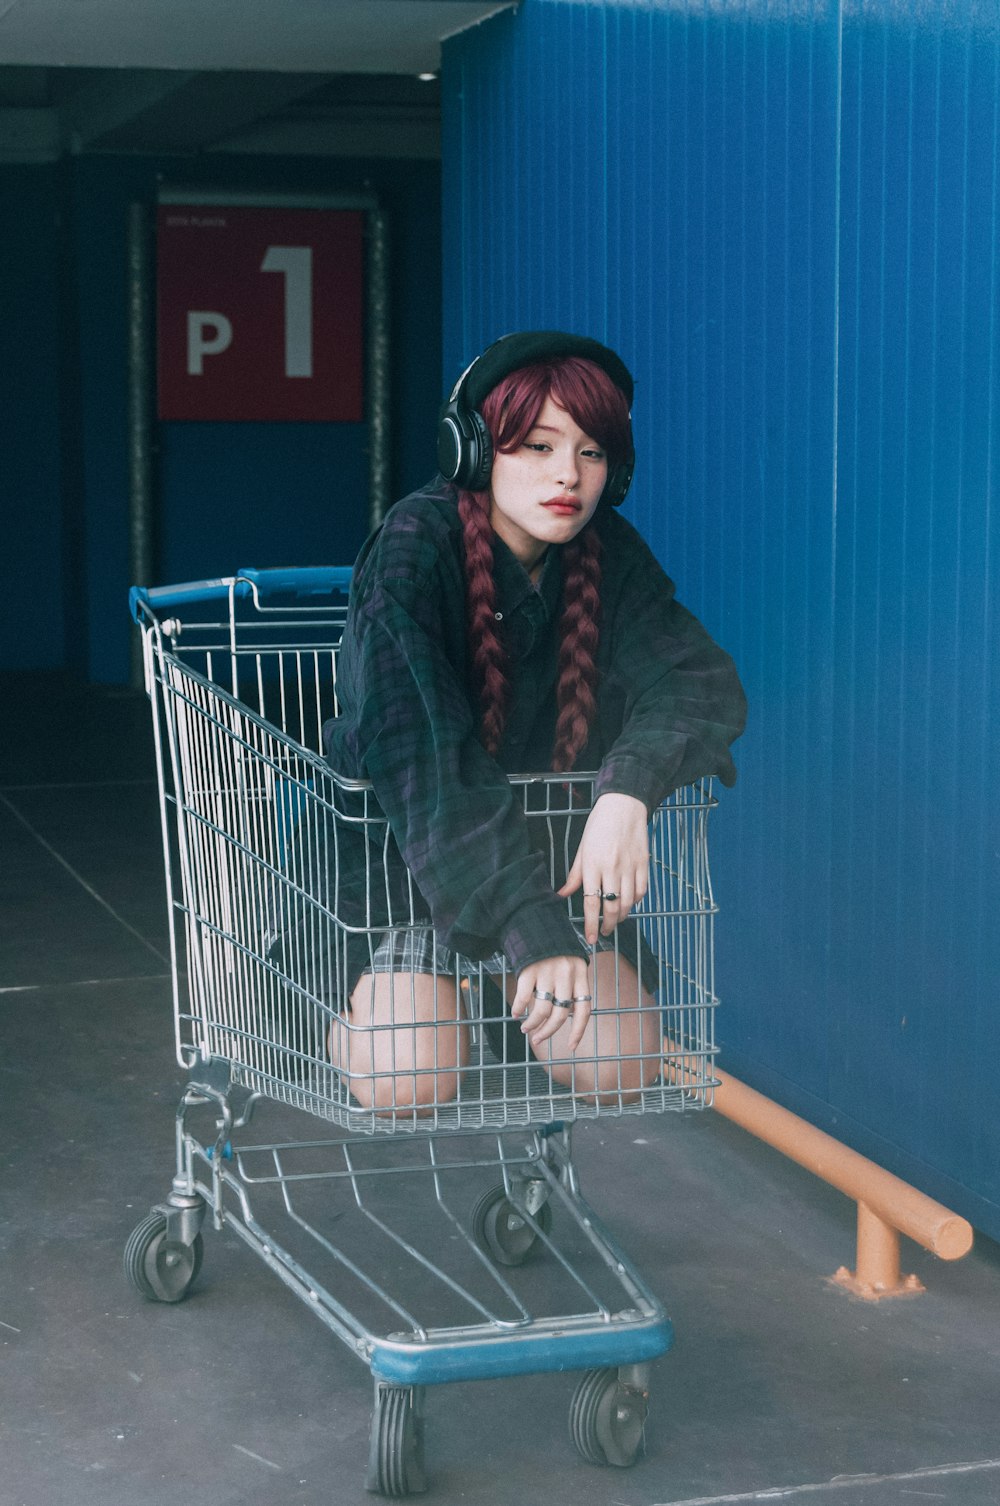 a woman with red hair sitting in a shopping cart